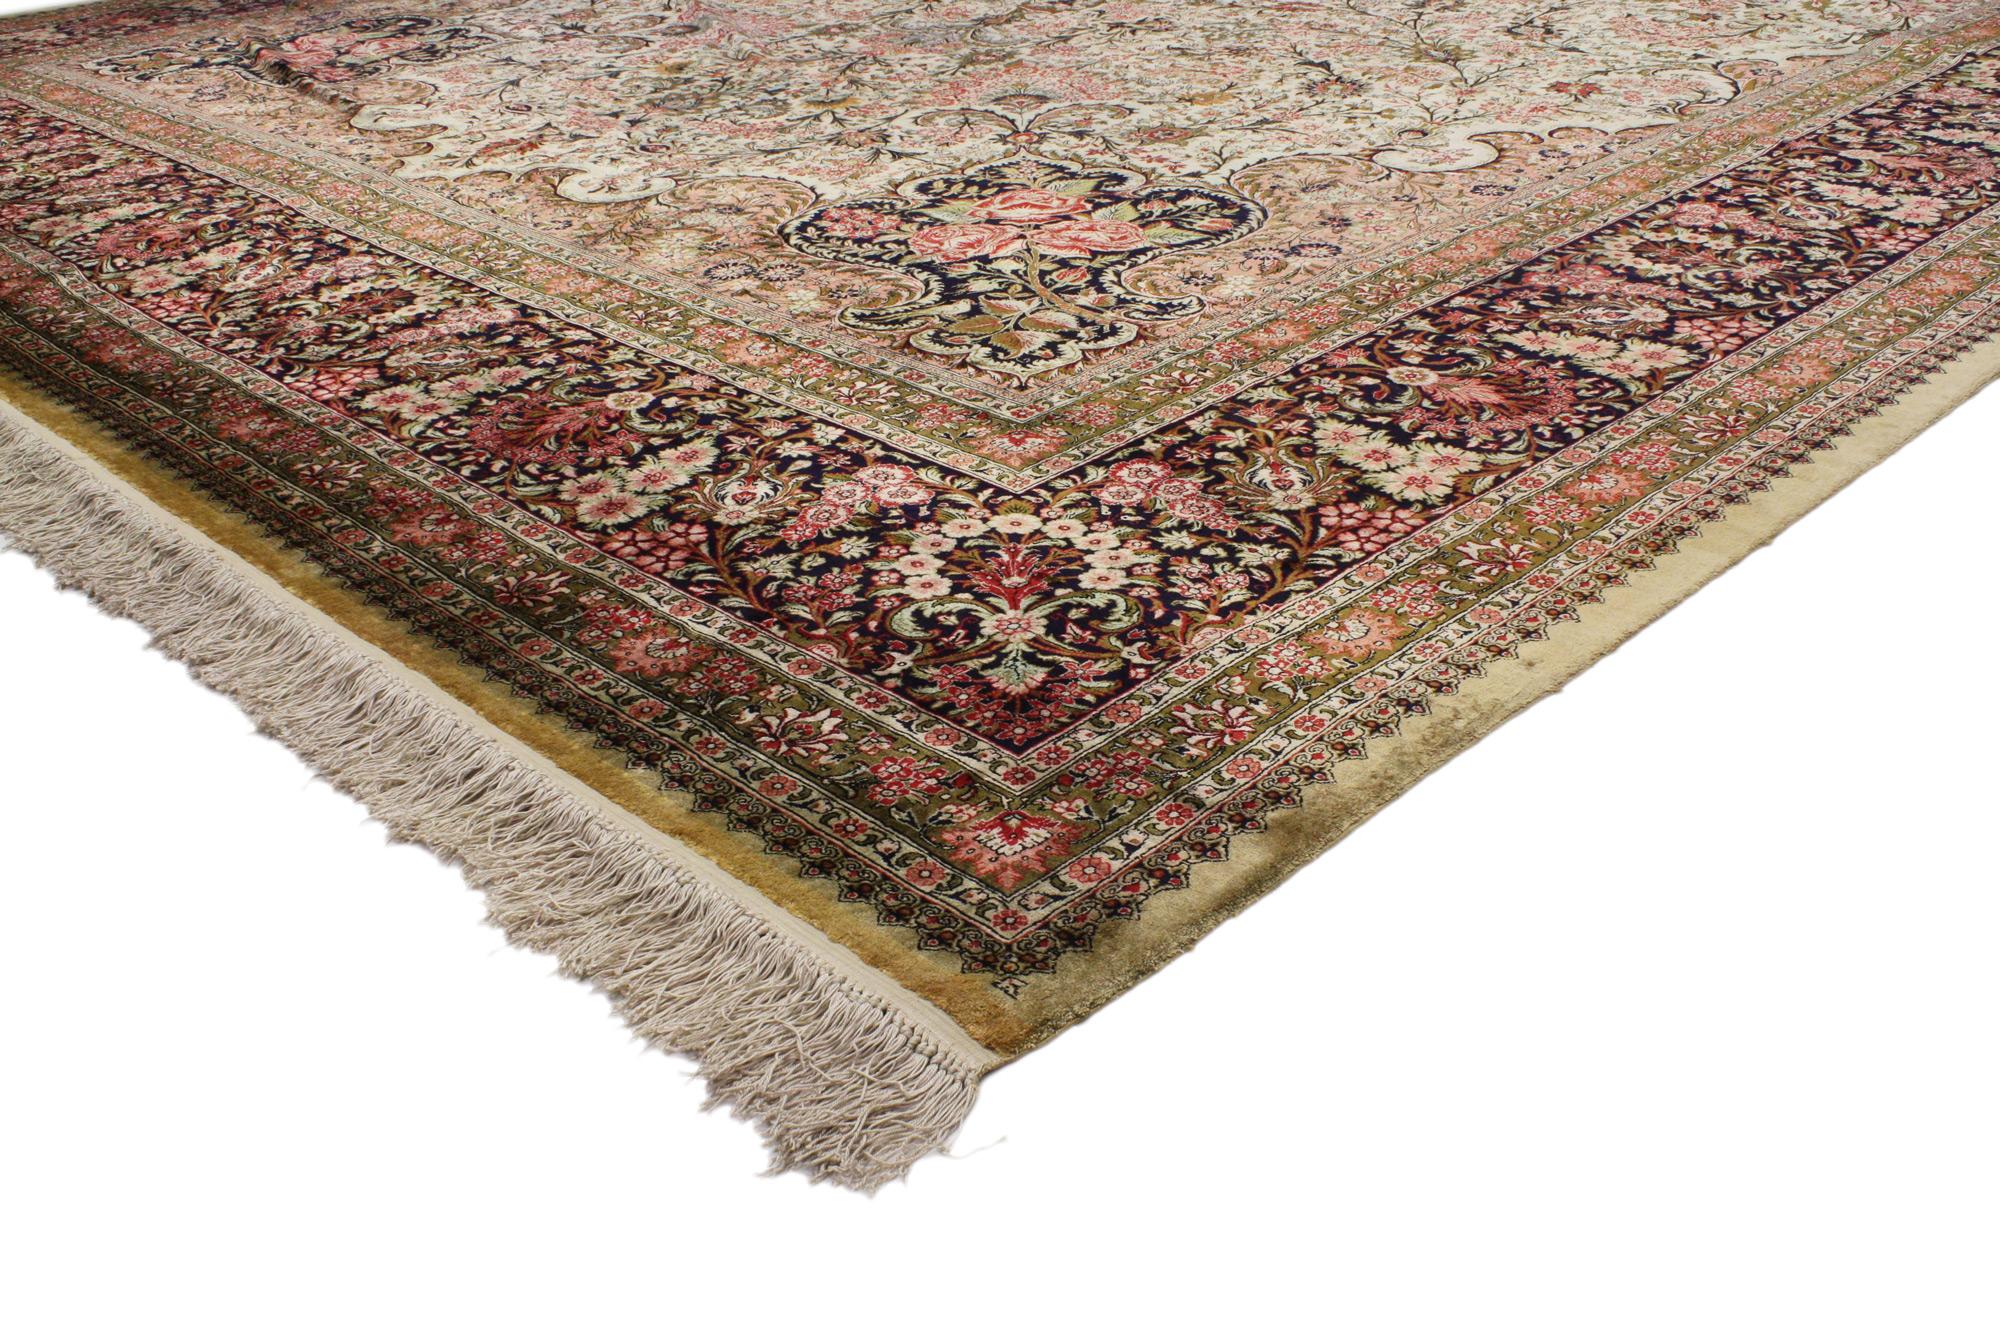 72891 Vintage Persian Silk Qum Rug, 13'07 X 20'01. Emanating French Romanticism with incredible detail and texture, this vintage Persian silk  Qum rug is a captivating vision of woven beauty. The visual complexity and dreamy colorway woven into this